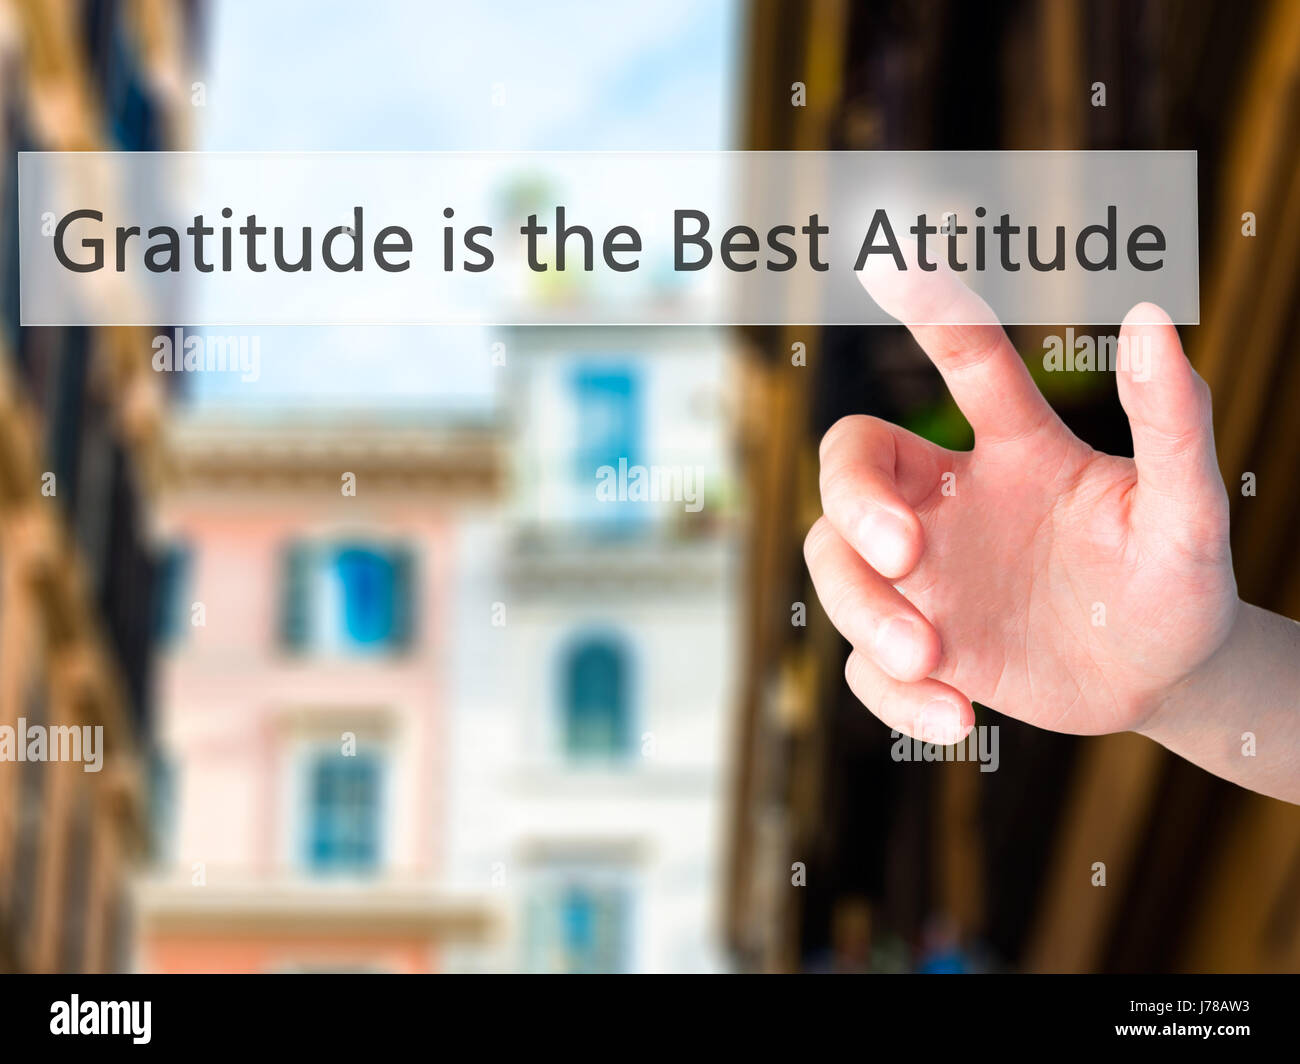 Gratitude is the Best Attitude - Hand pressing a button on blurred  background concept . Business, technology, internet concept. Stock Photo  Stock Photo - Alamy